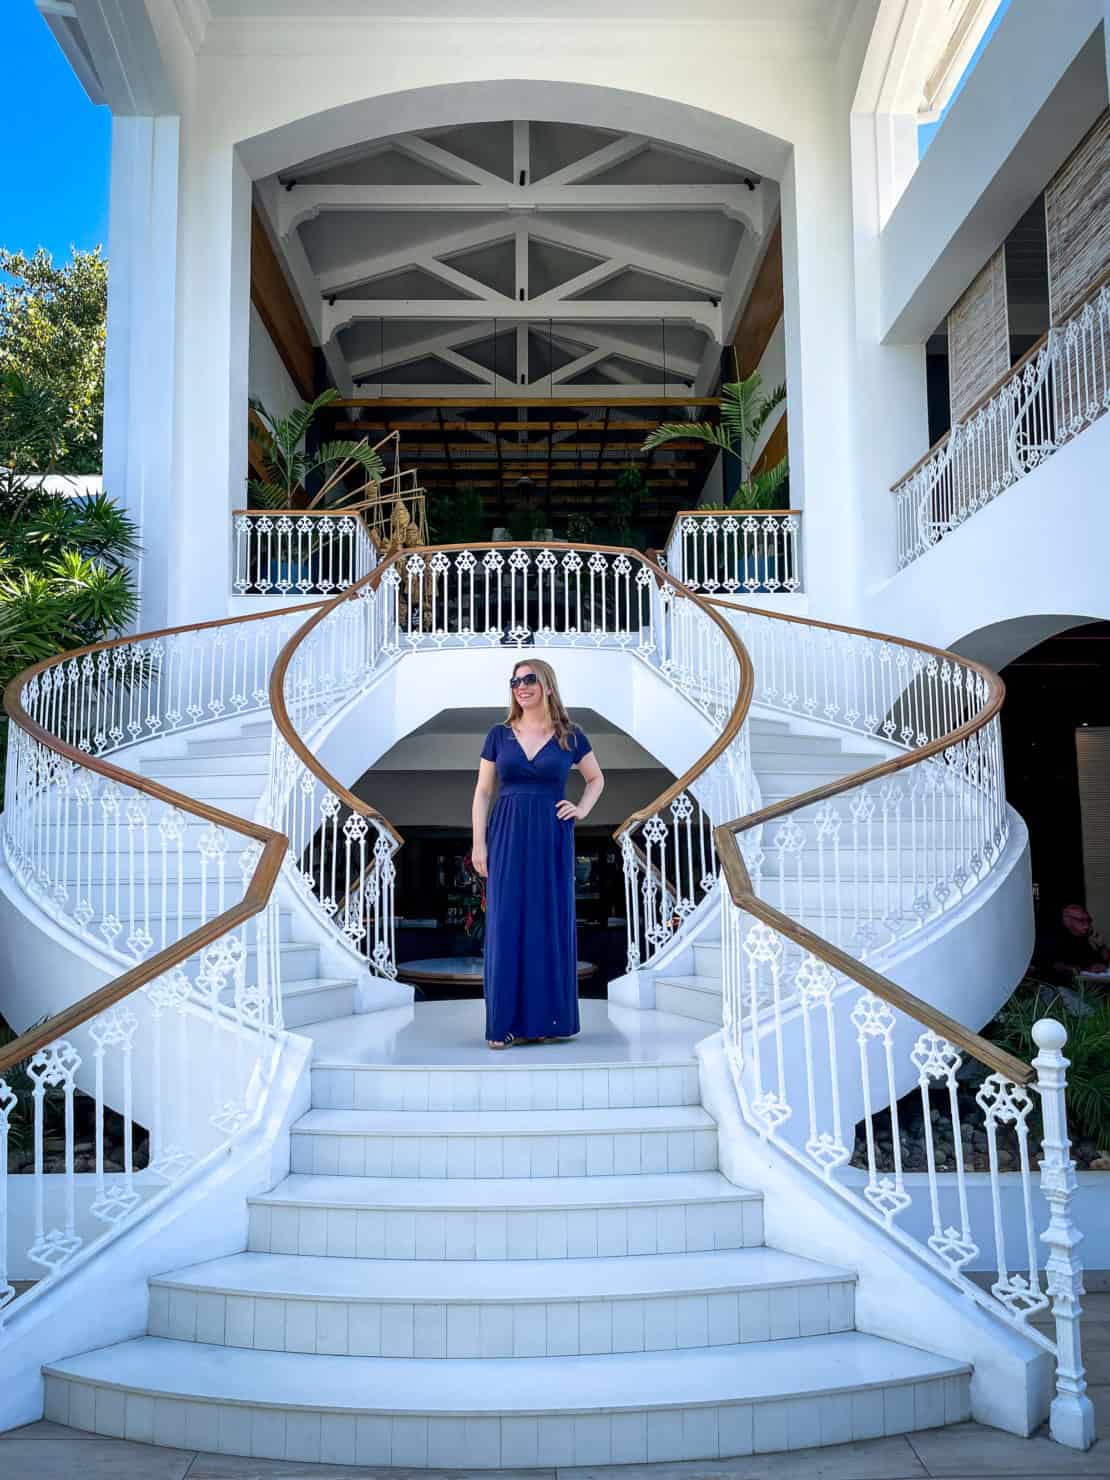 Abigail King stands on the grand staircase at the Sunlife Sugar Beach hotel in Mauritius